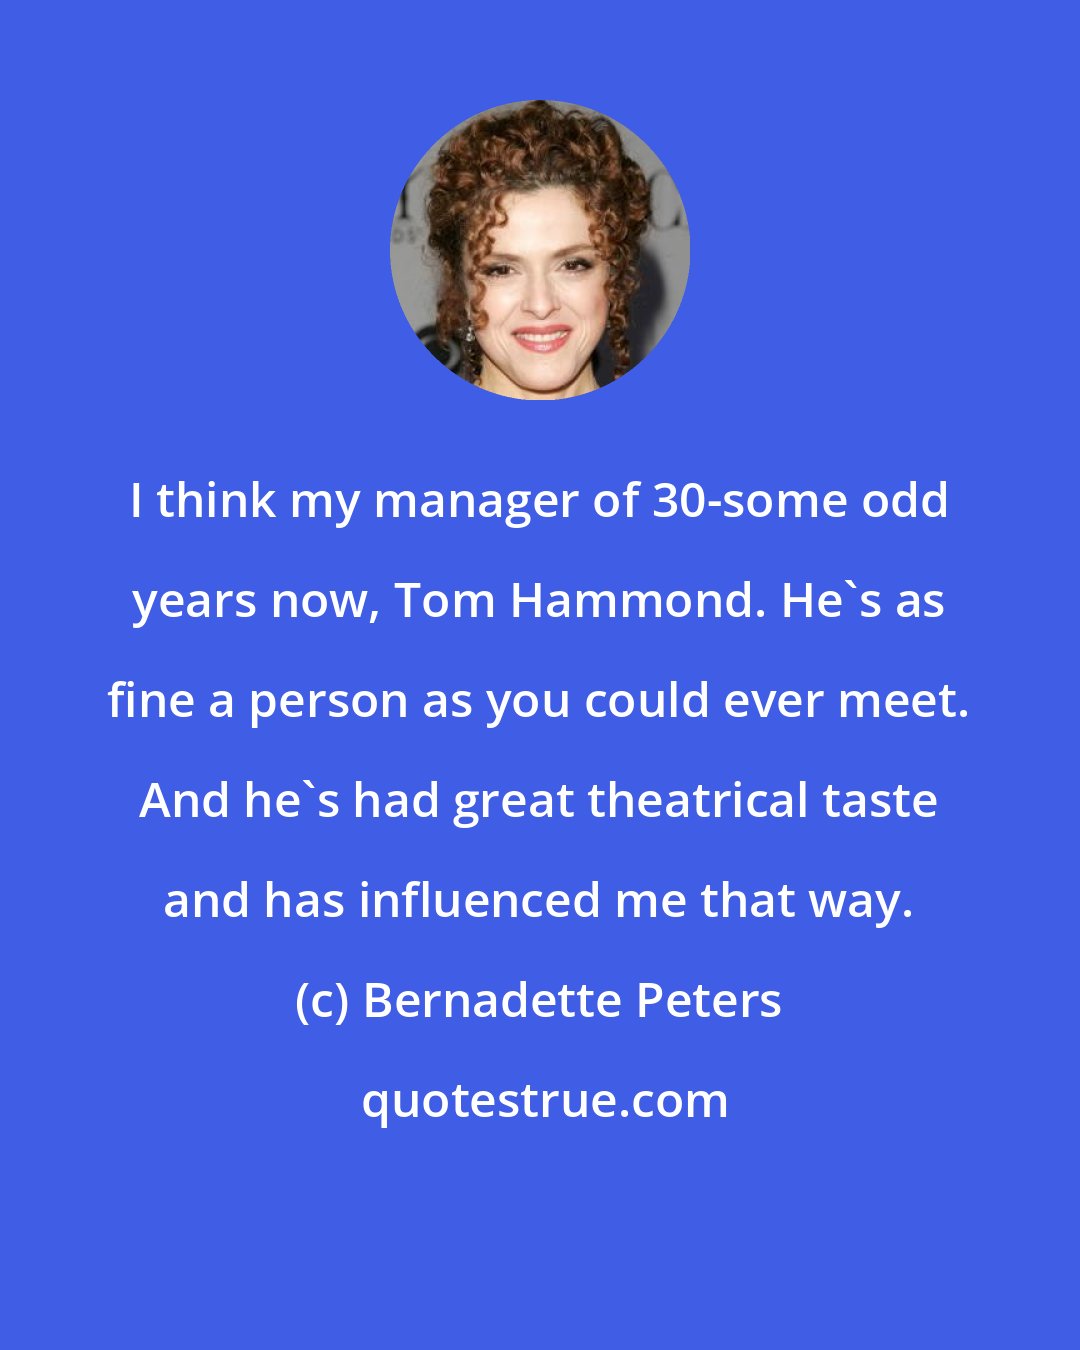 Bernadette Peters: I think my manager of 30-some odd years now, Tom Hammond. He's as fine a person as you could ever meet. And he's had great theatrical taste and has influenced me that way.